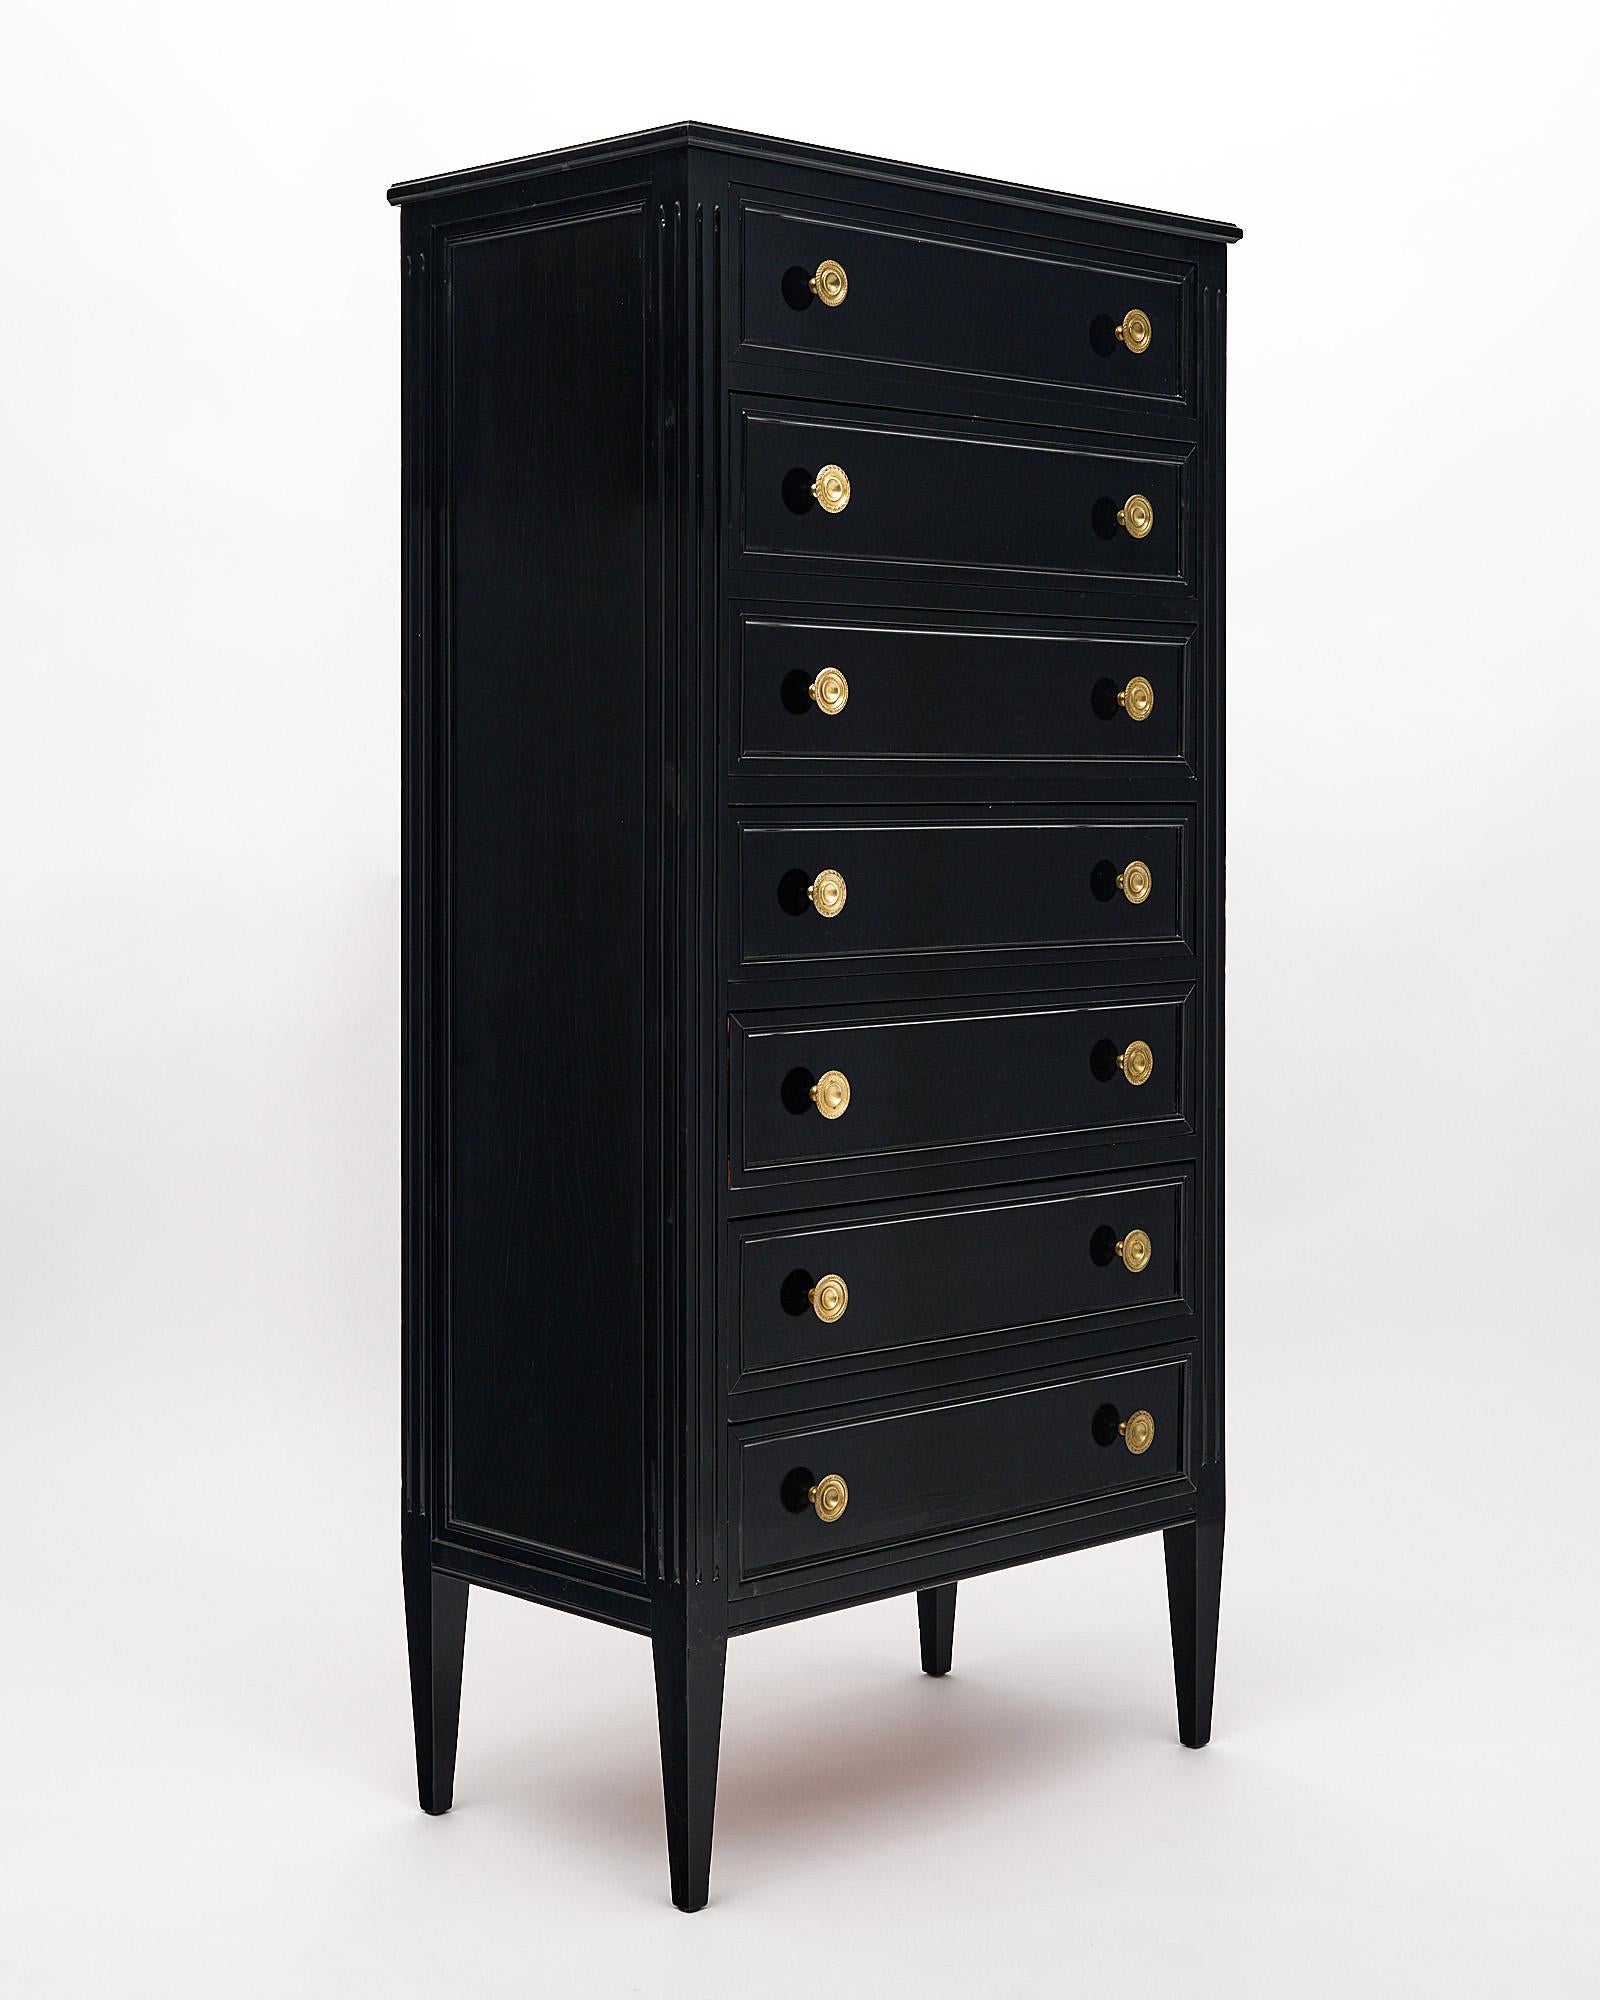 Semainier, chest of sever dovetailed drawers with the original finely cast gilt brass pulls. This French piece is in the Louis XVI style and finished with a museum quality ebonized French polish for a striking luster.